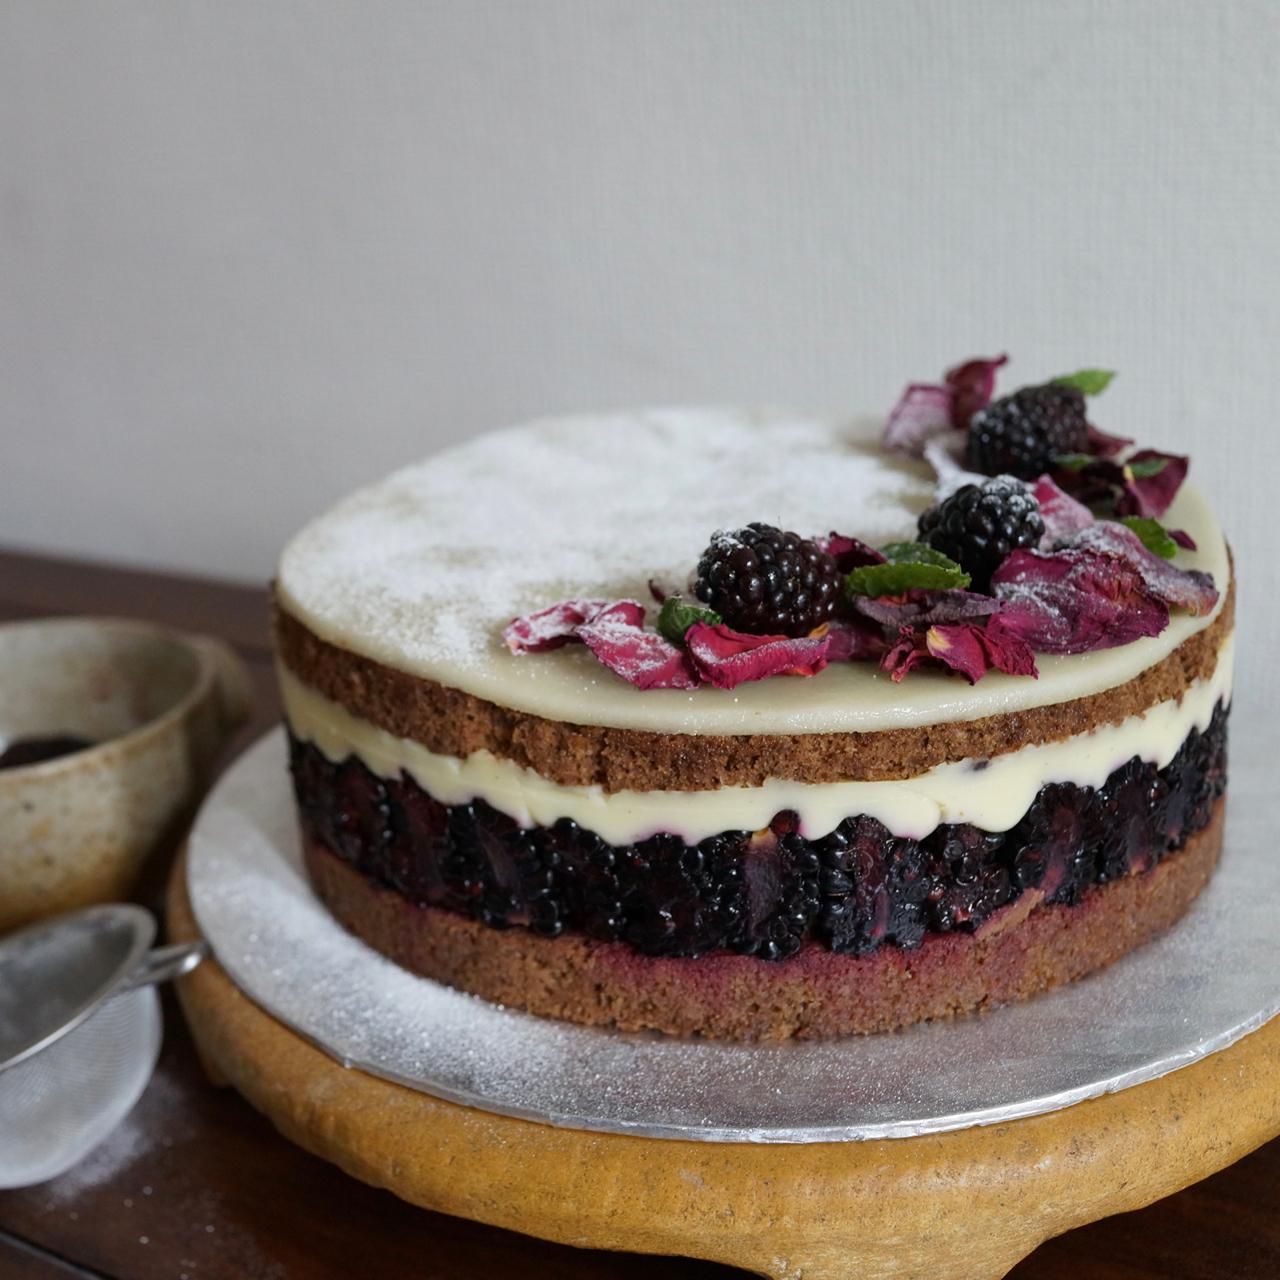 Slightly healthier chocolate mûrier recipe! Blackberry and chocolate layer cake, glutenfree or not… :) | lili's cakes